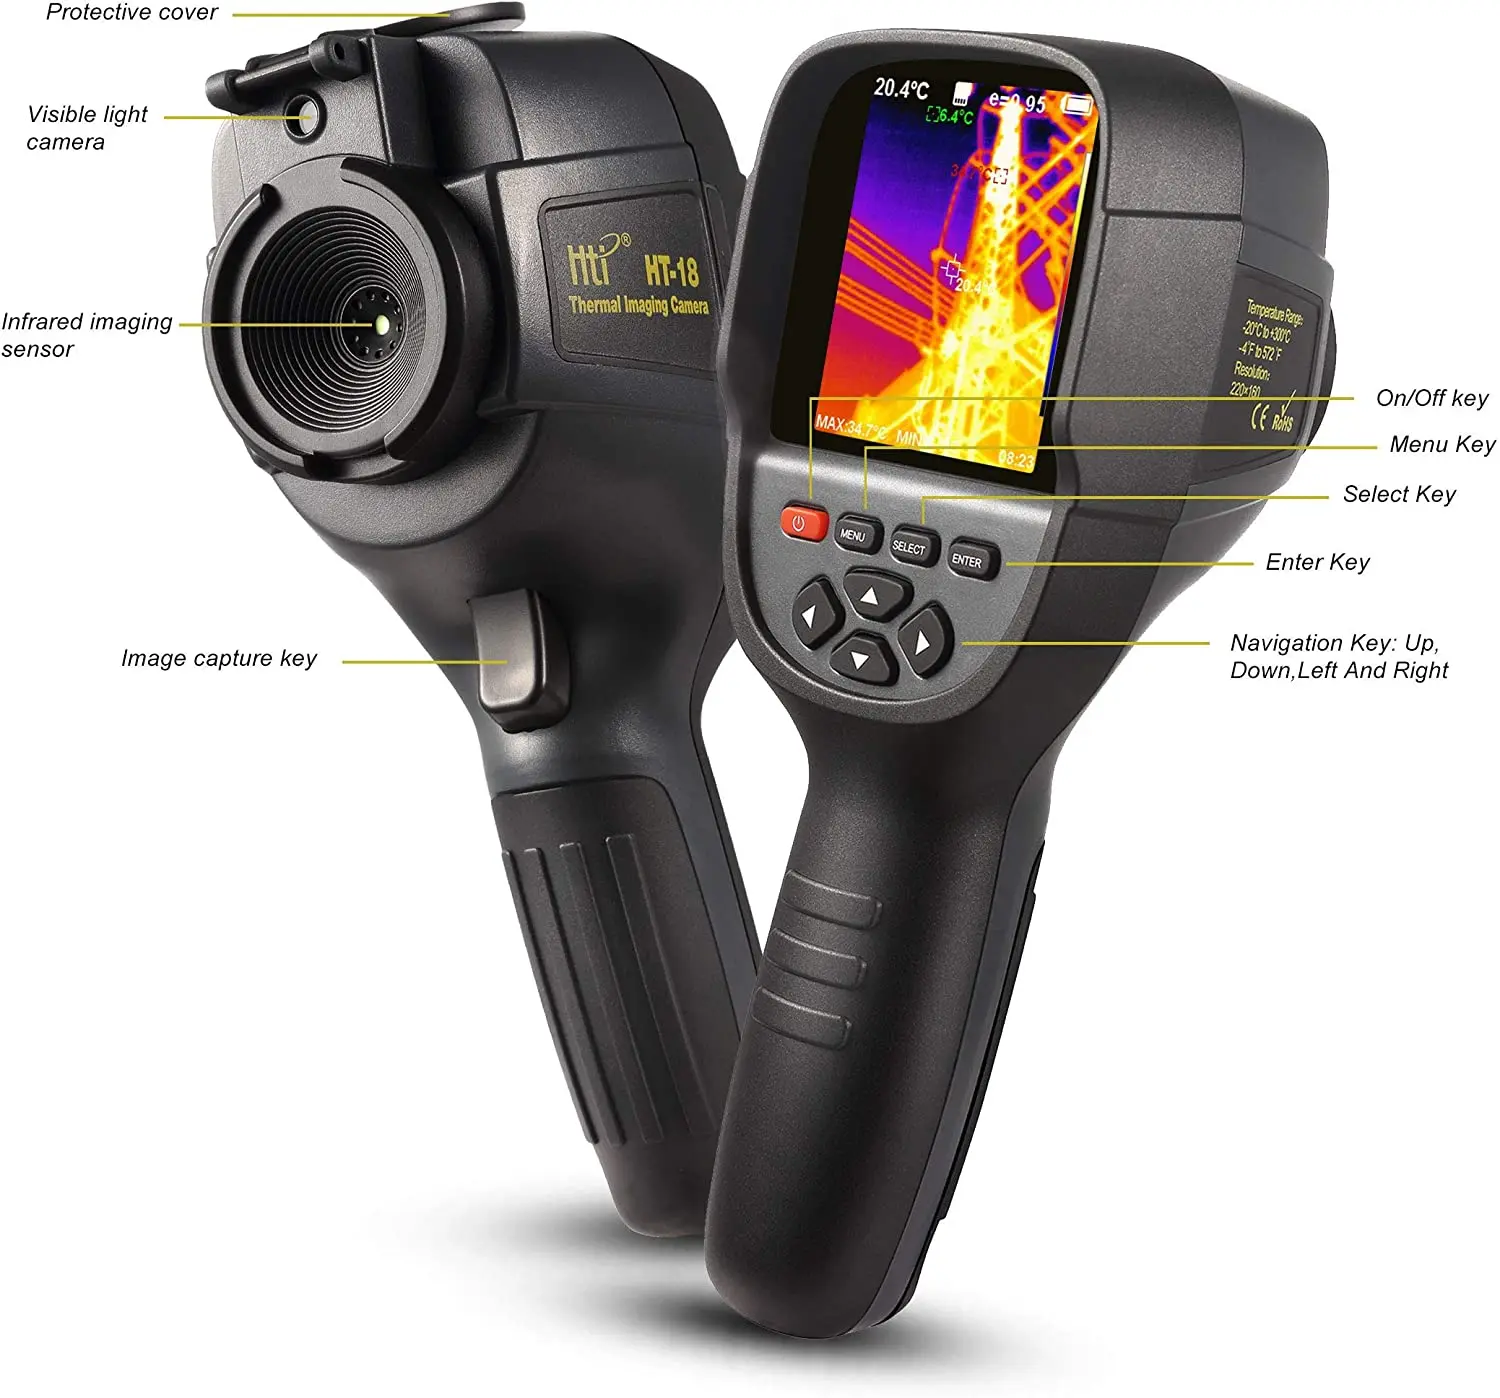 220 x 160 IR Resolution Thermal Imager, Handheld 35200 Pixels Thermal  Imaging Camera with 3.2